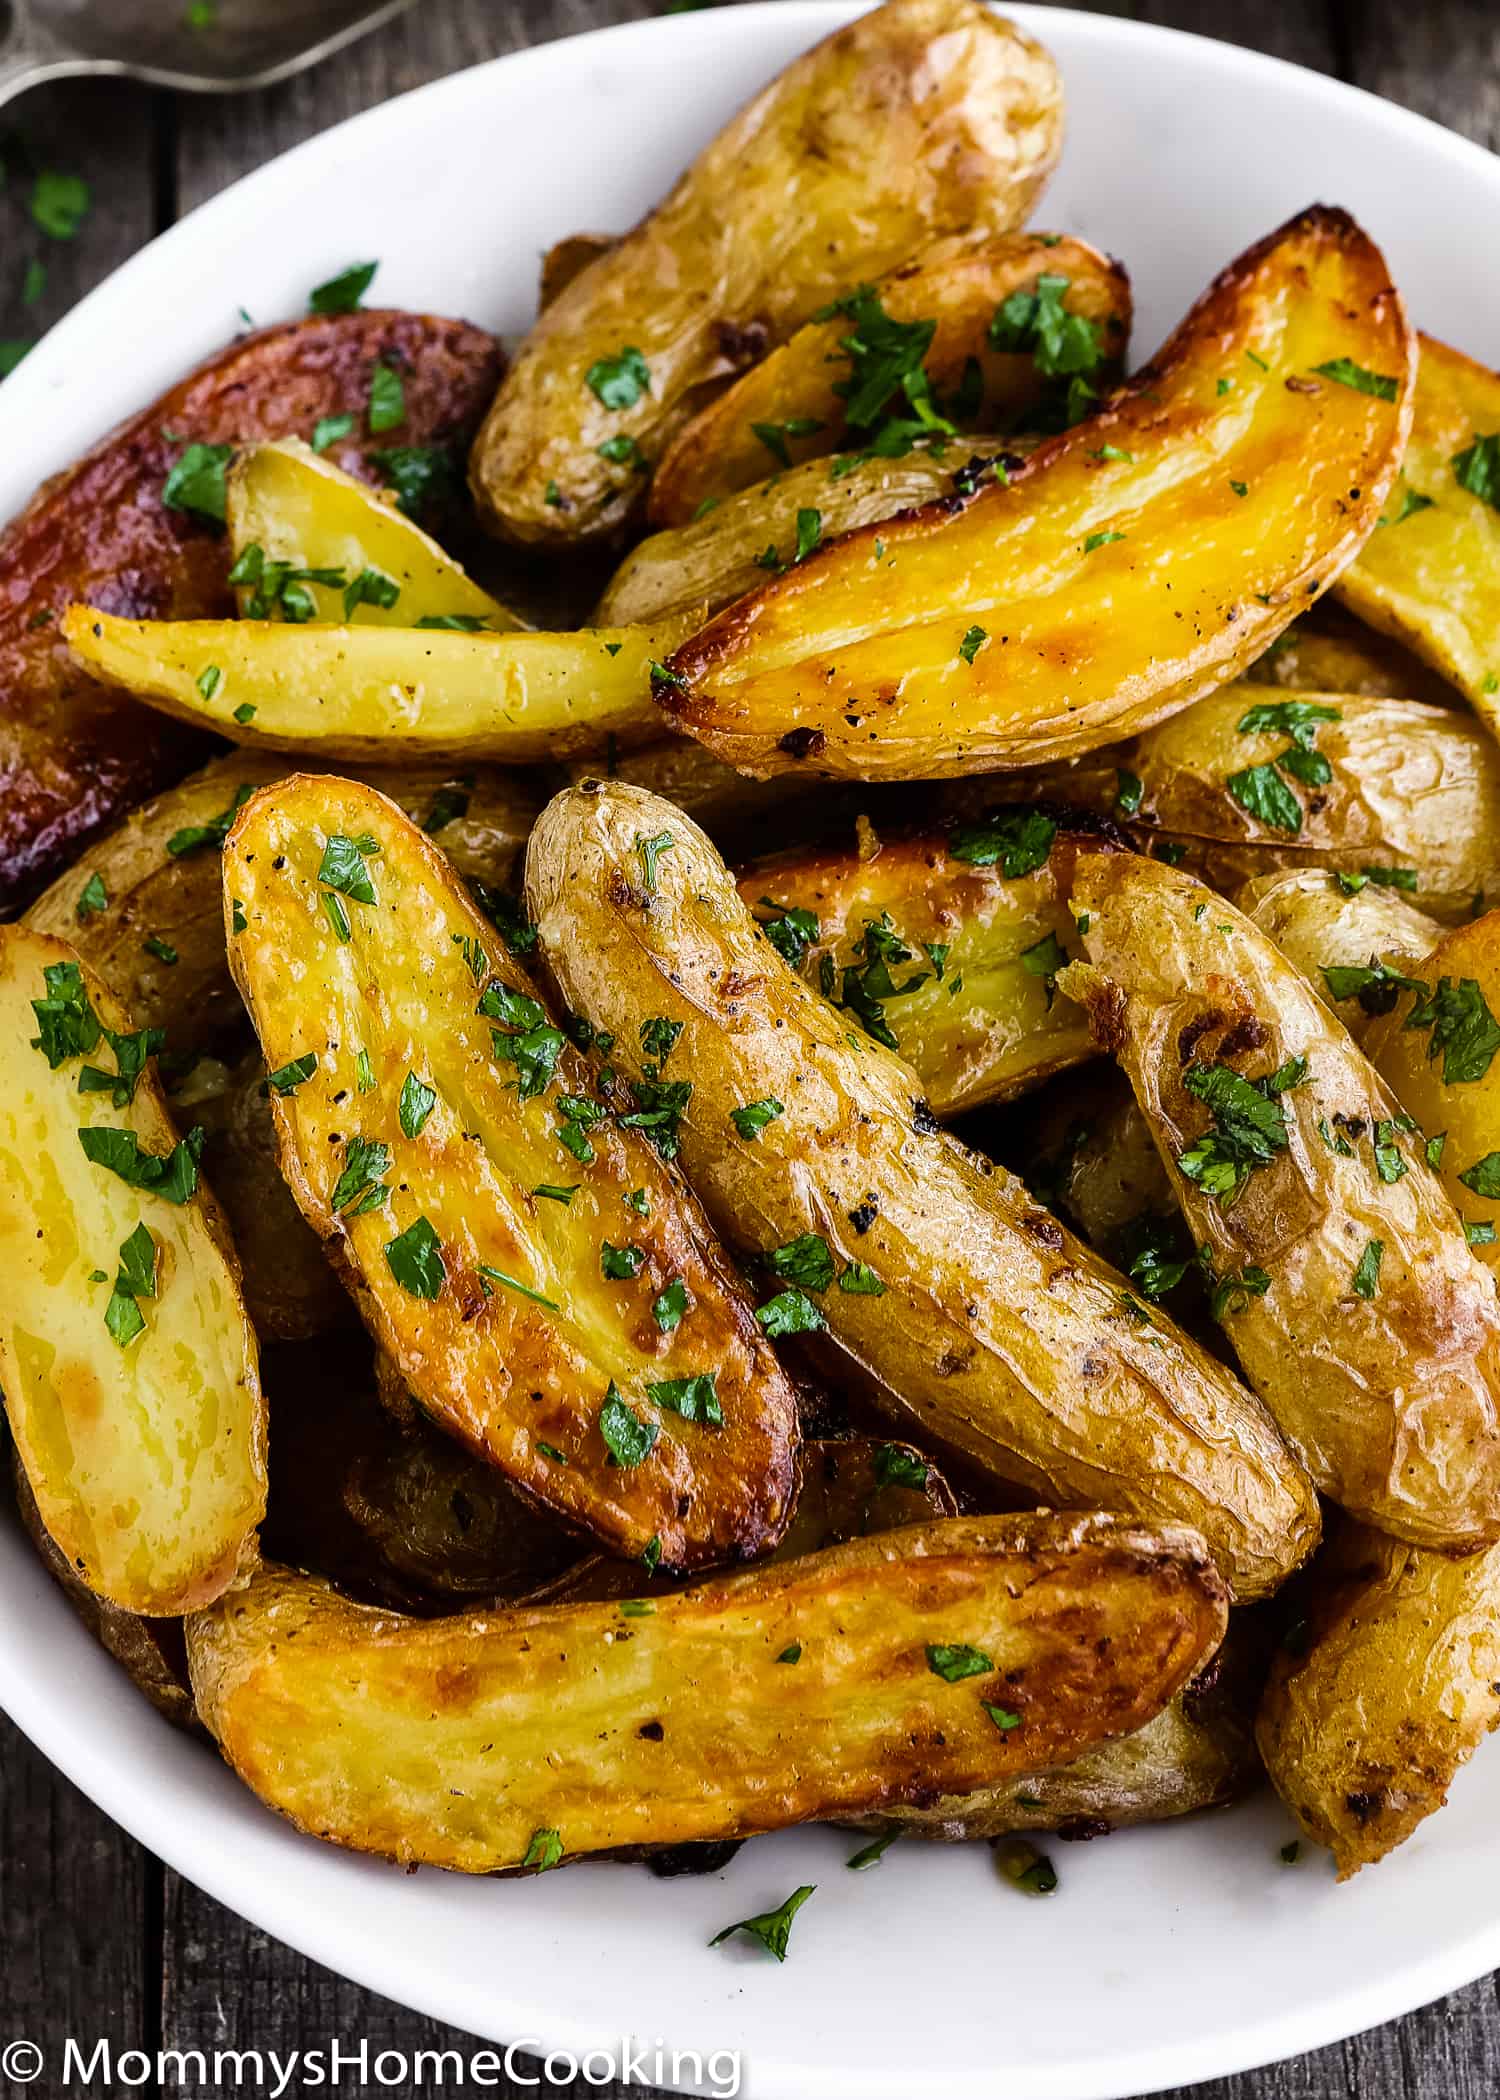 These Easy Garlic Lemon Roasted Potatoes are crispy outside, soft inside, a little salty and lemony. Perfect side dish for just about any entree. https://mommyshomecooking.com